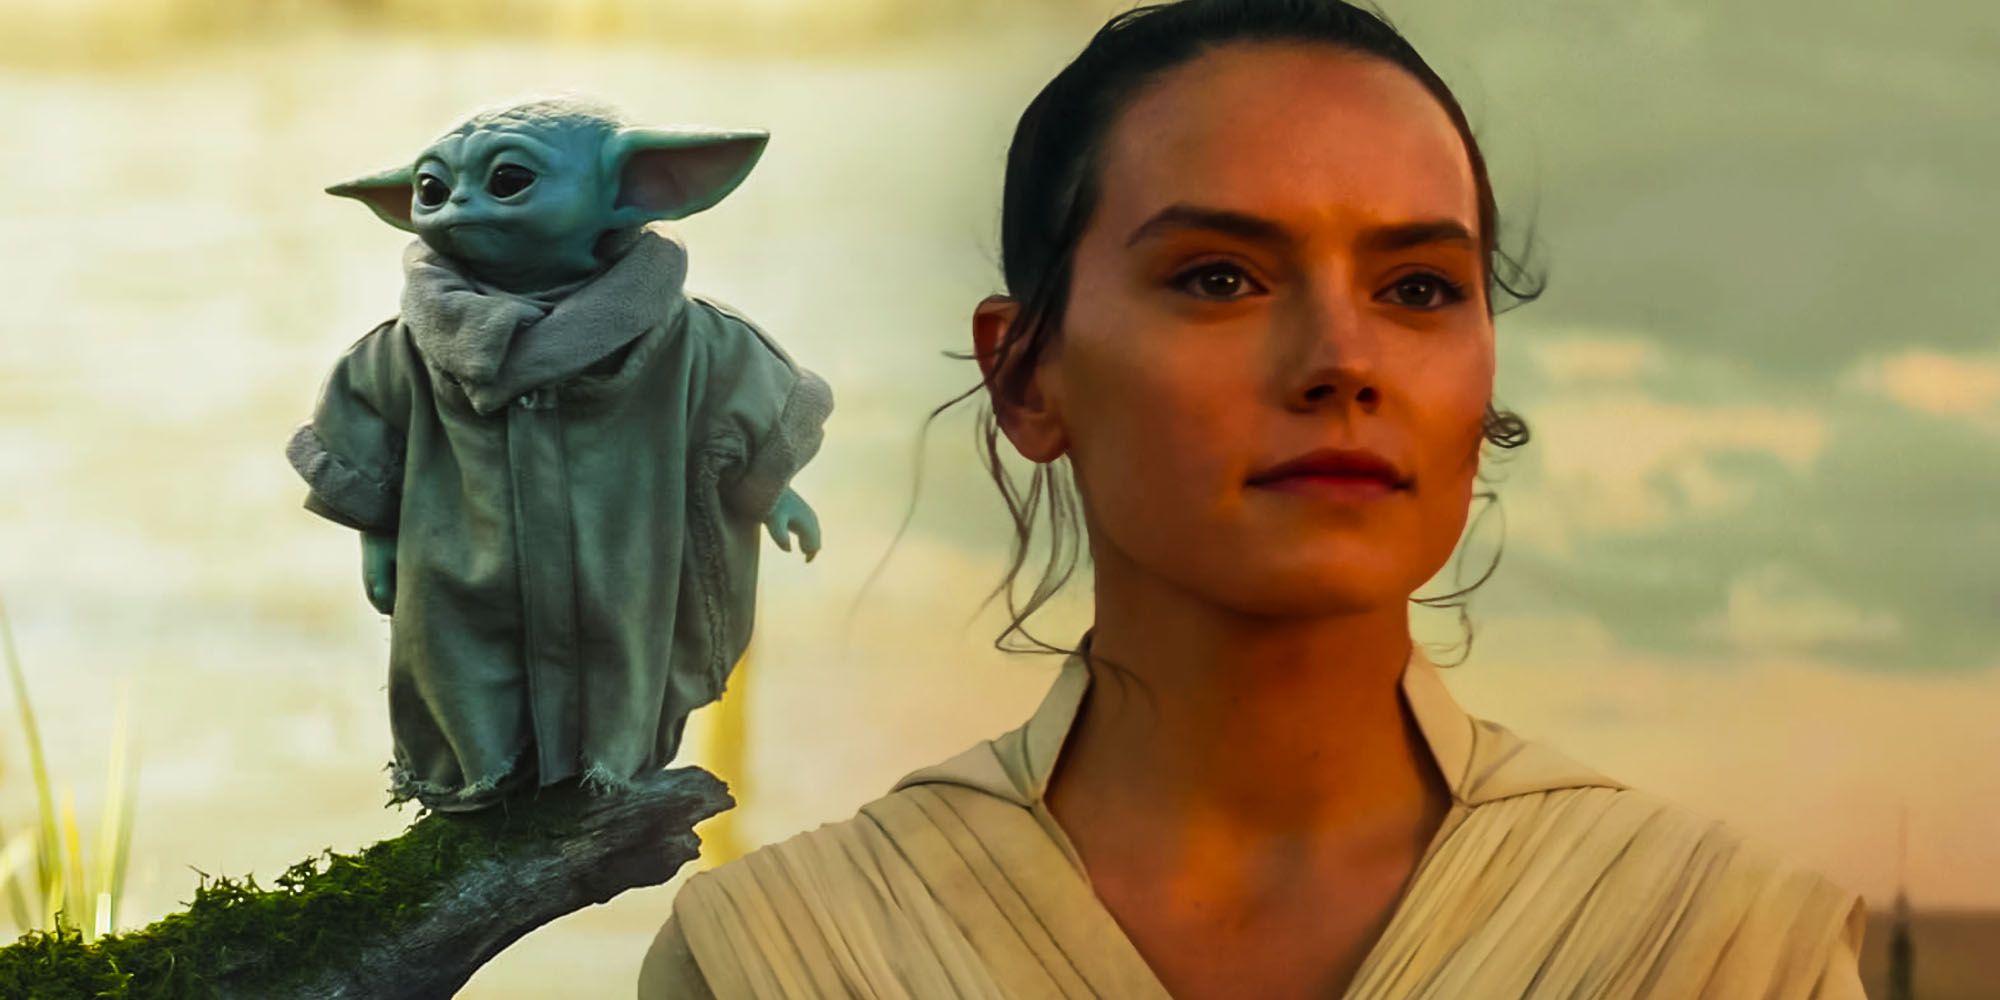 Grogu Could Play a Major Role in Daisy Ridley's Rey STAR WARS